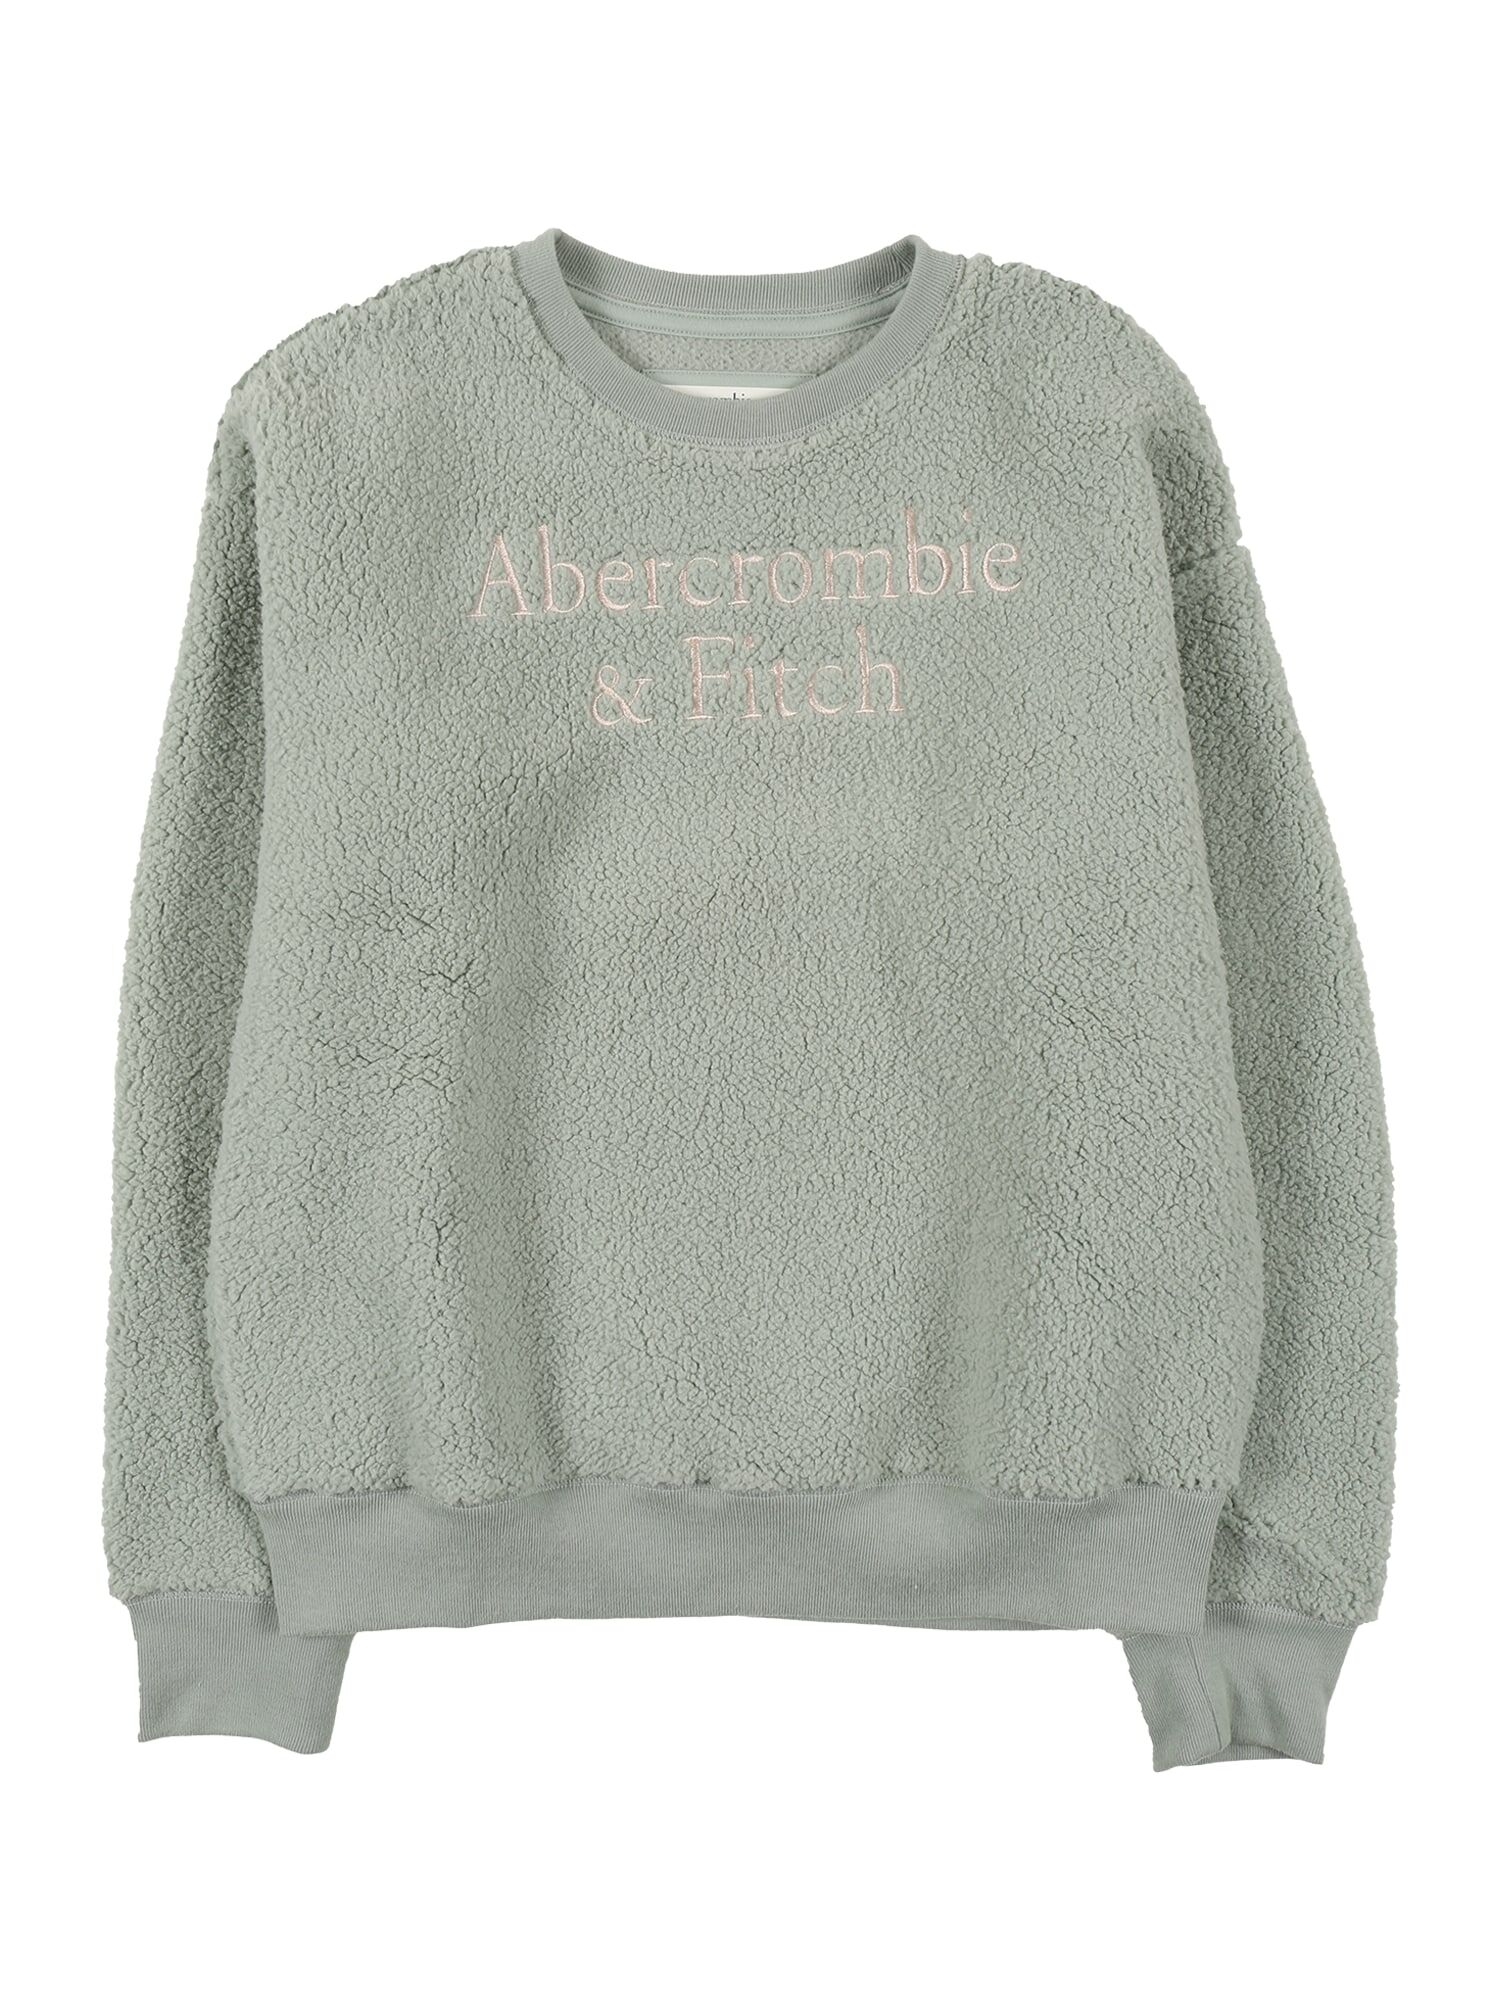 Abercrombie & Fitch Pullover Verde